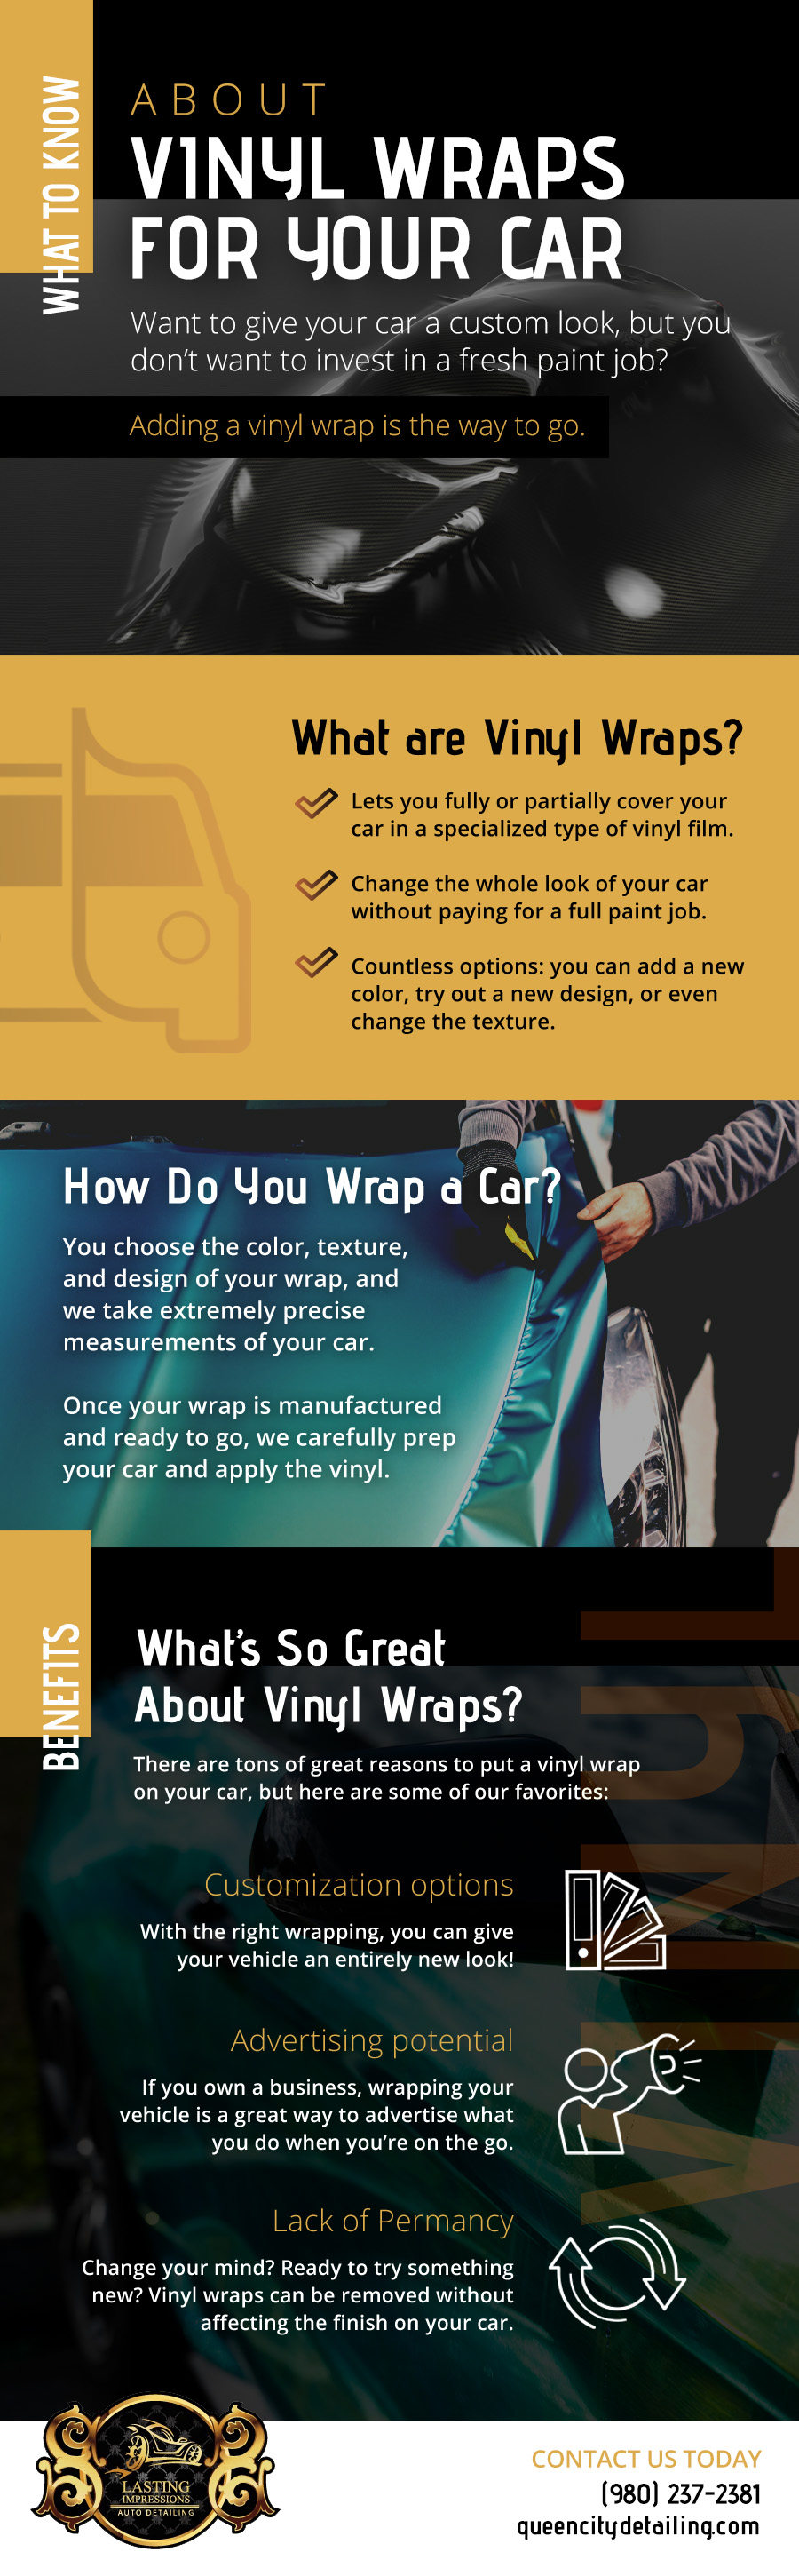 What You Should Know About Vinyl Wraps for Your Car [infographic]